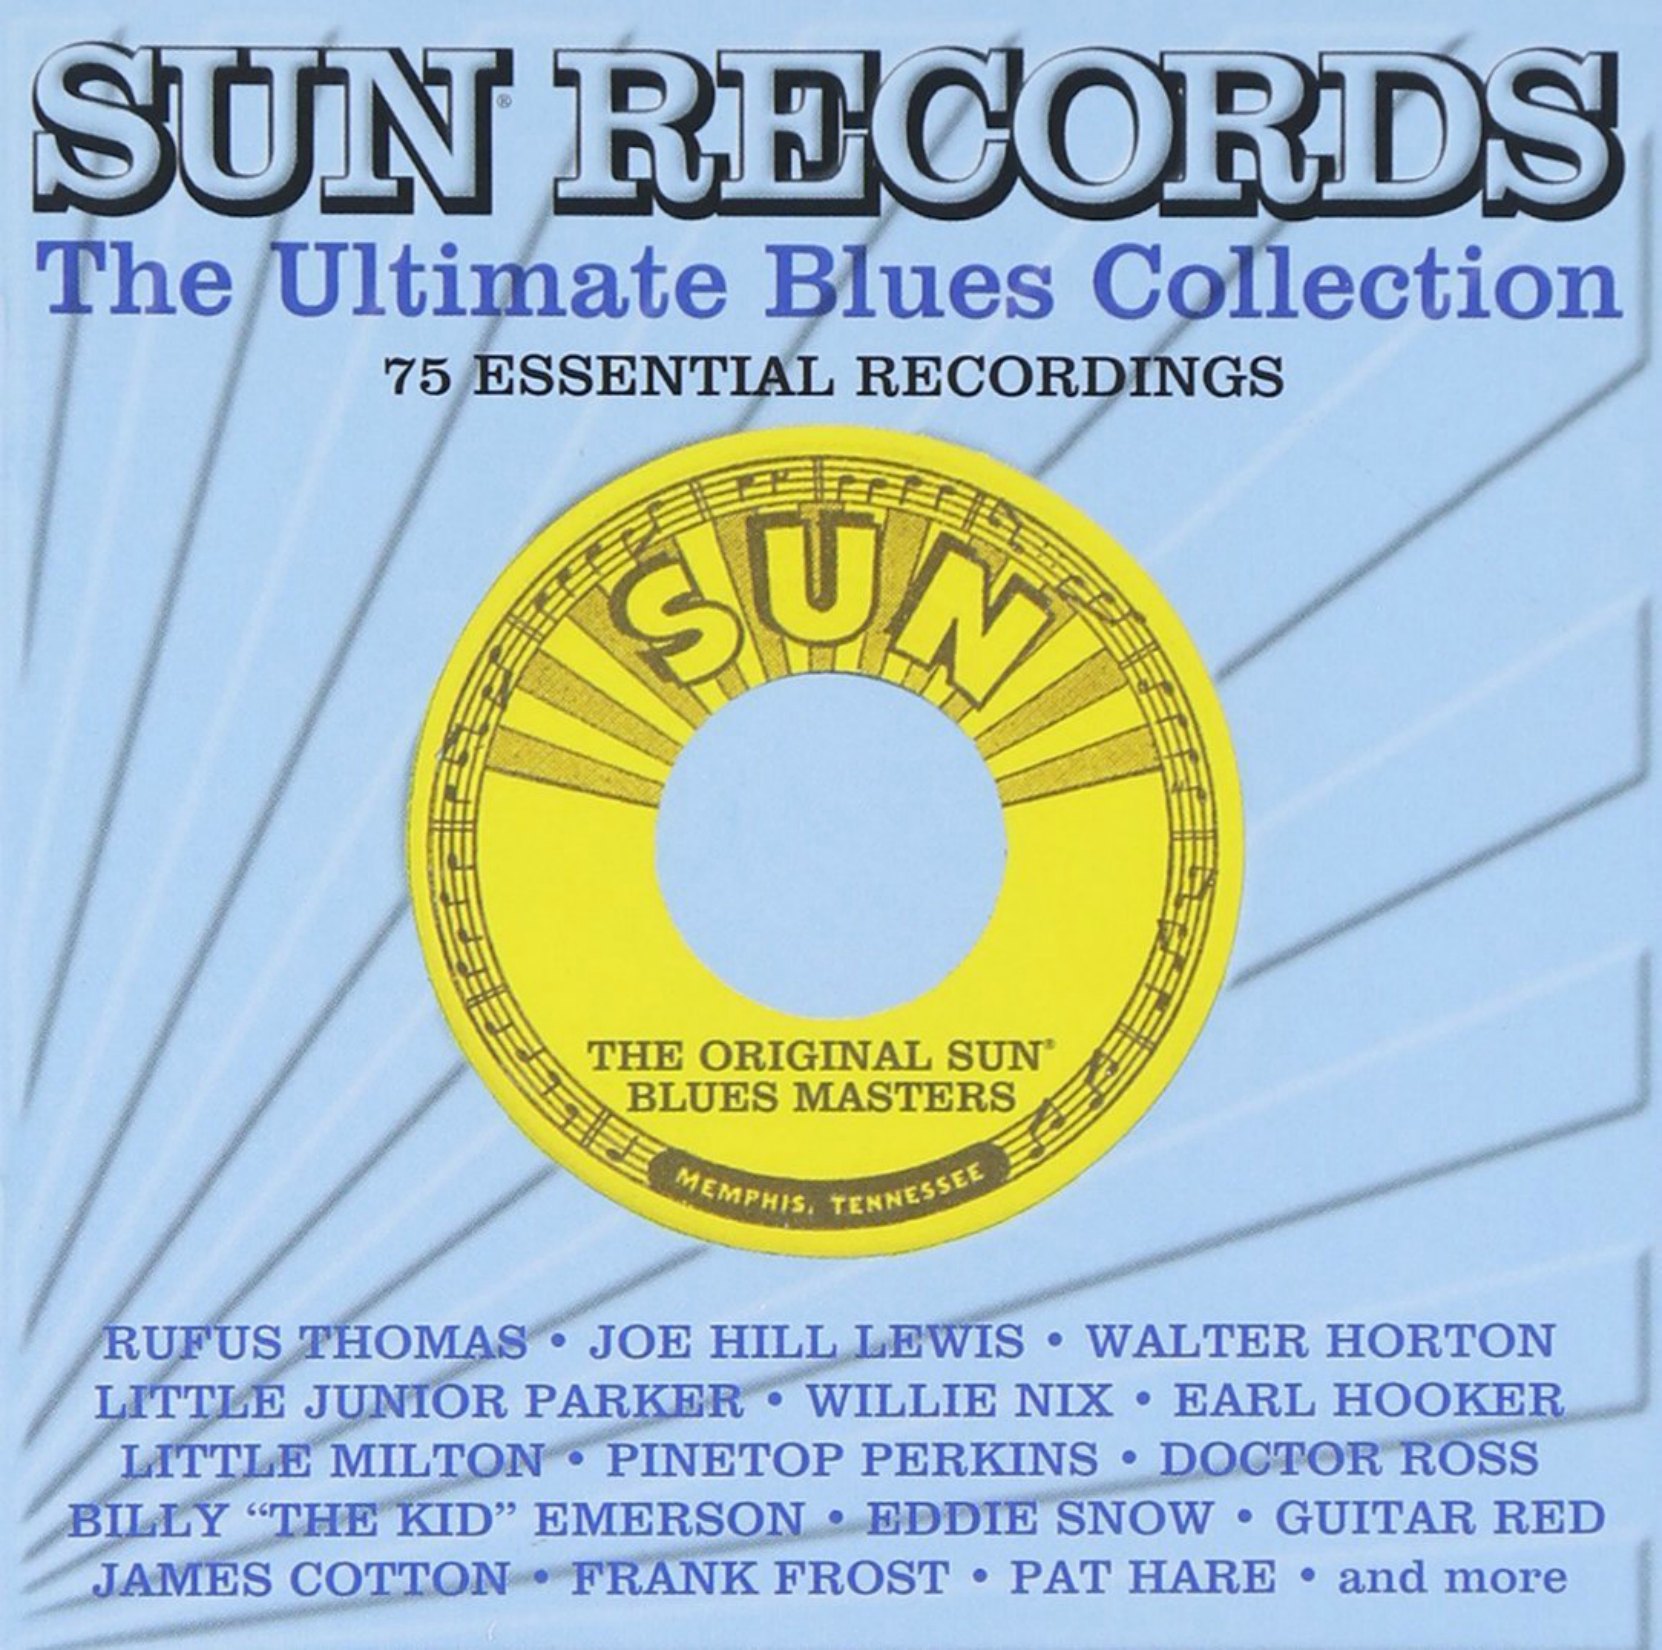 CD cover, Sun Records - The Ultimate Blues Collection, a 3 CD set of Sun Records blues recordings.